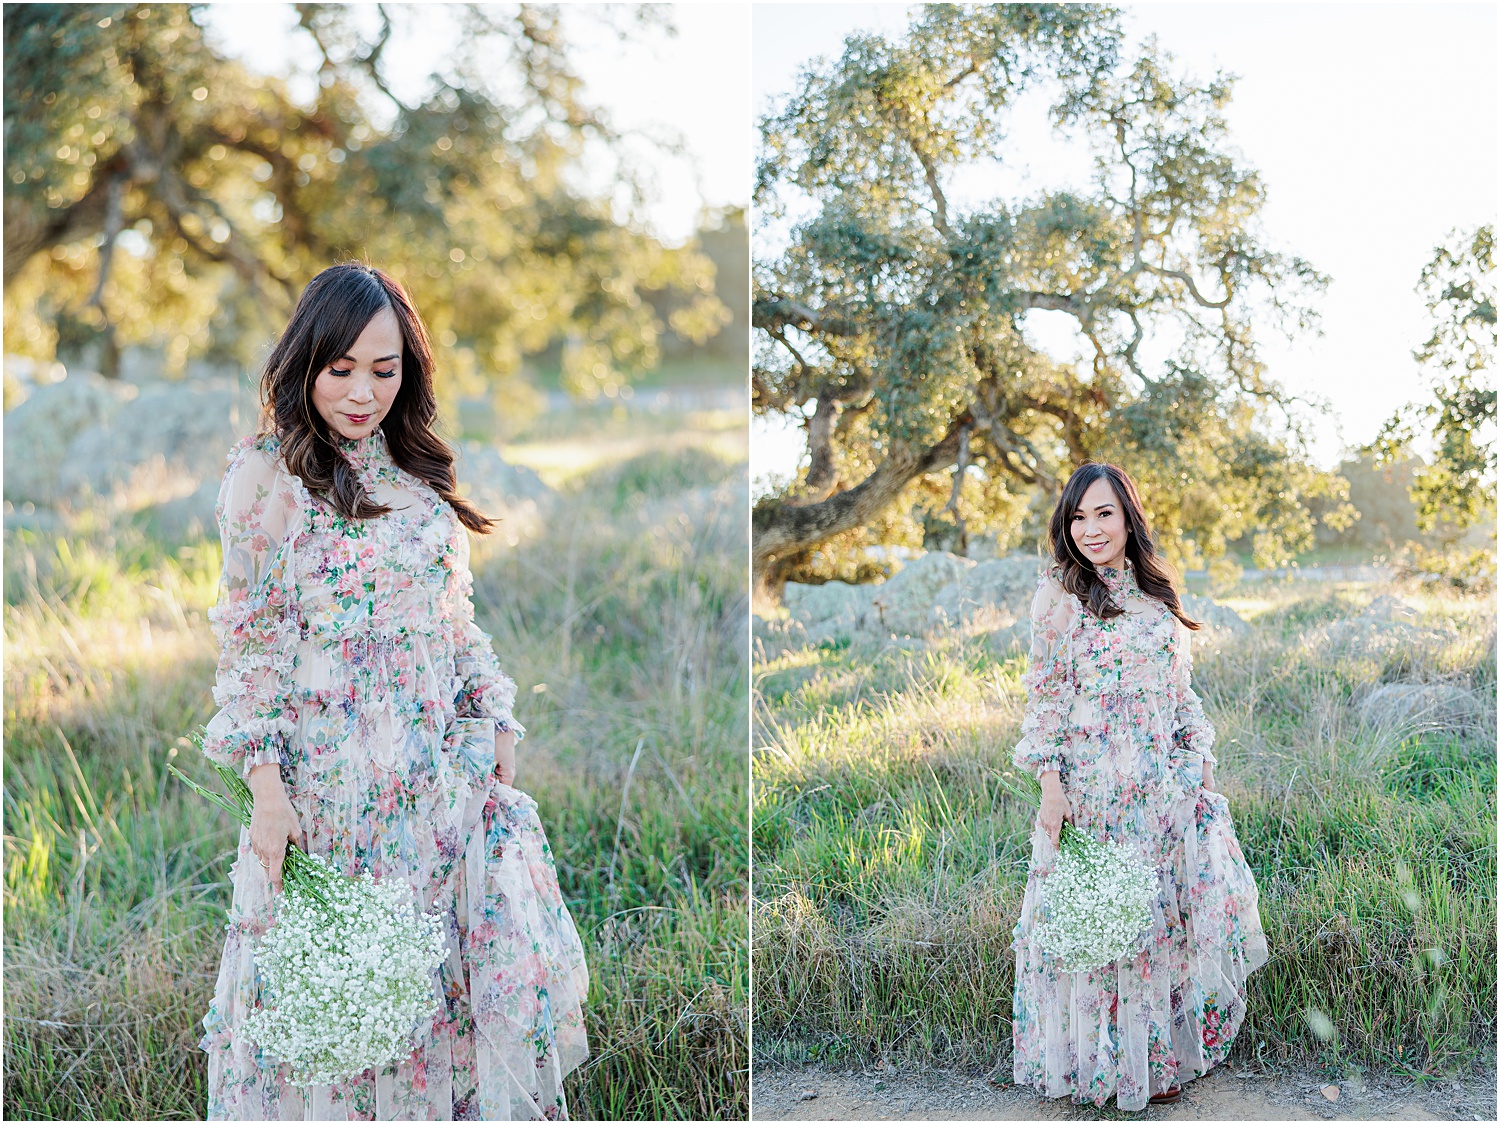 Woman in spring floral maxi dress in front of oak trees at golden hour